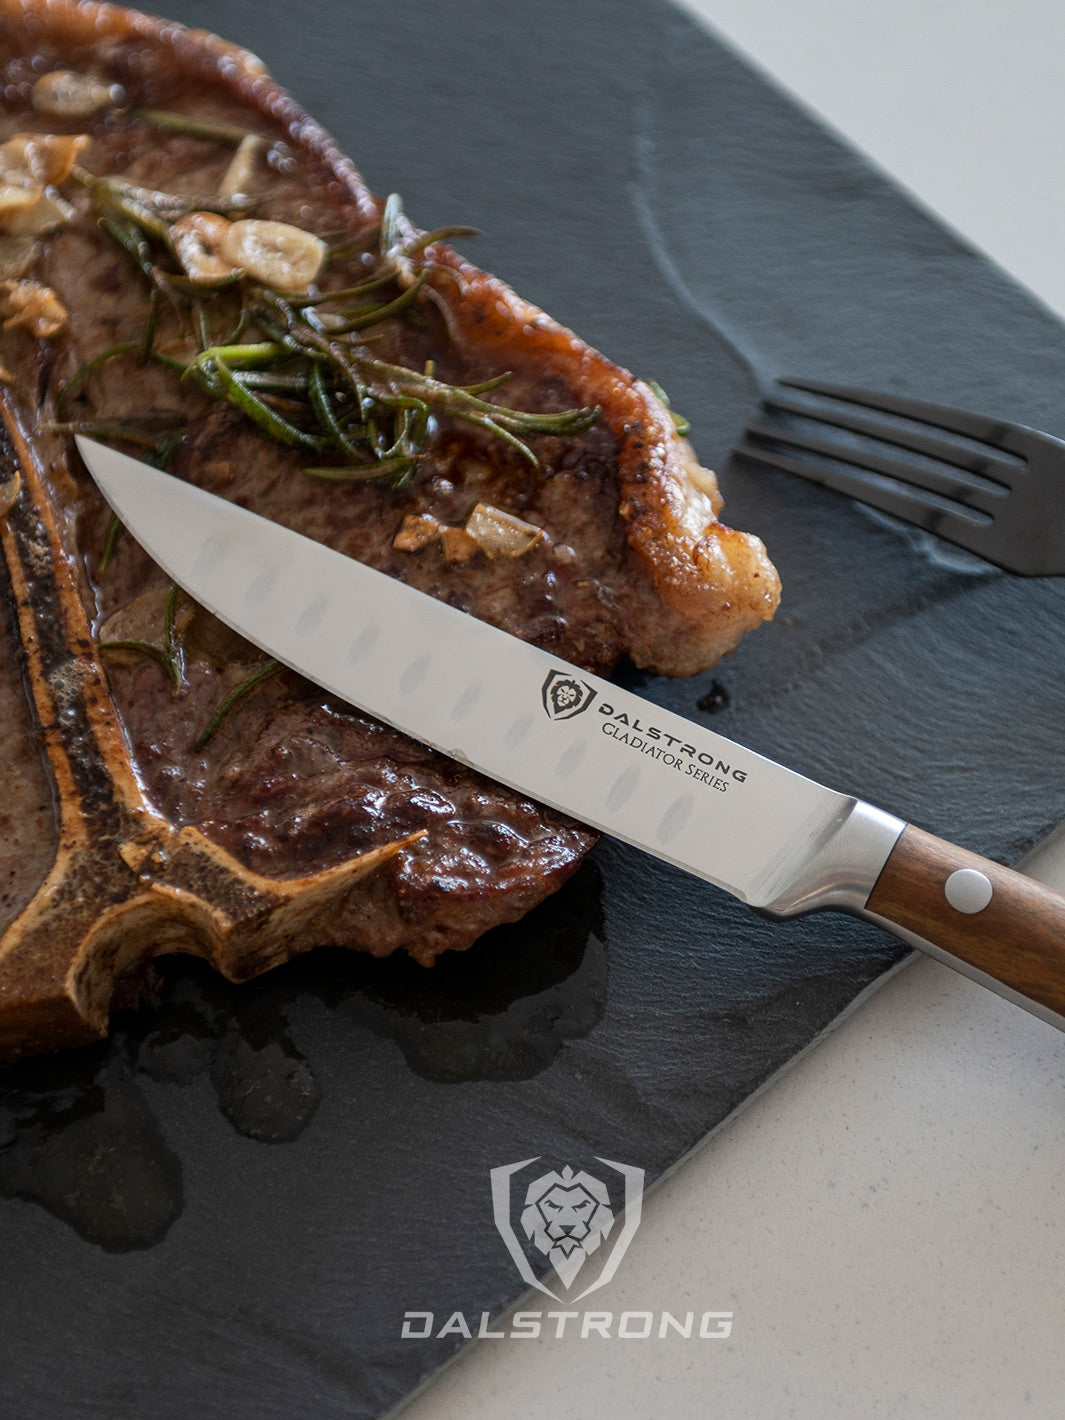 Dalstrong gladiator series 4 piece steak knife set with olive wood handle on top of a t-bone steak.